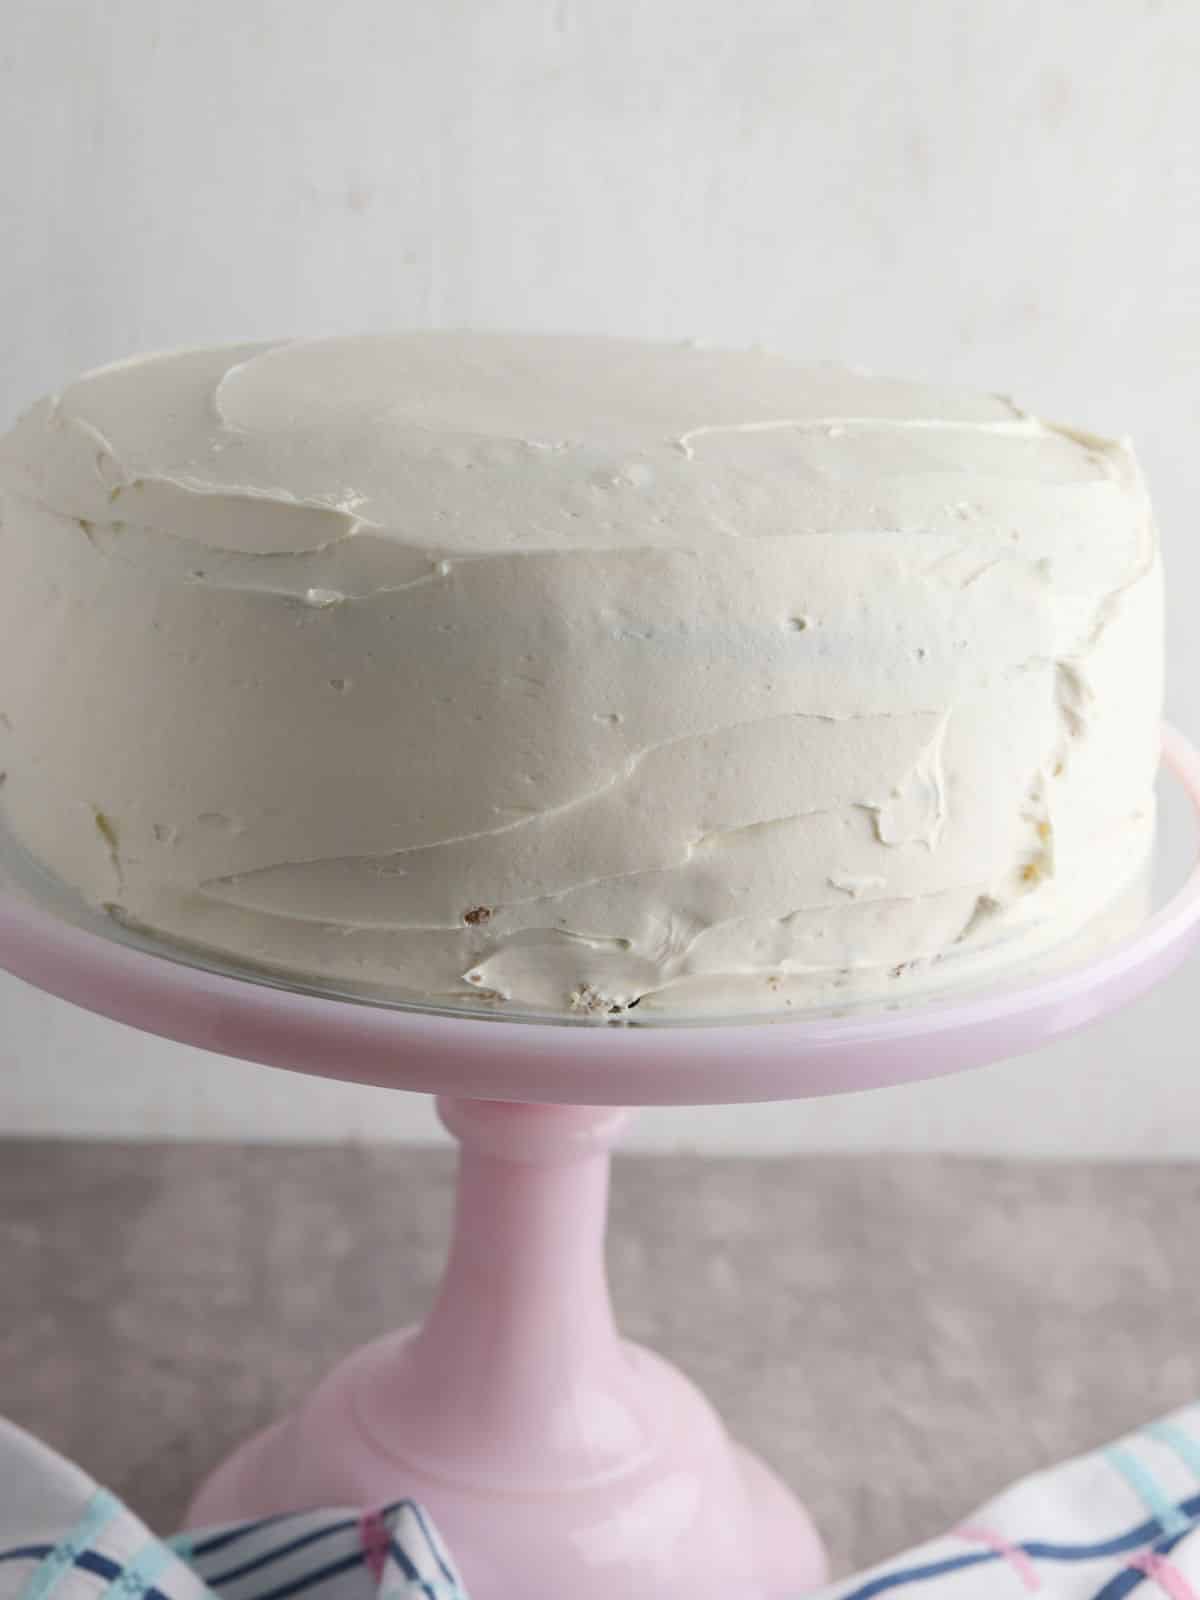 cream cheese frosted cake on pink cake stand.